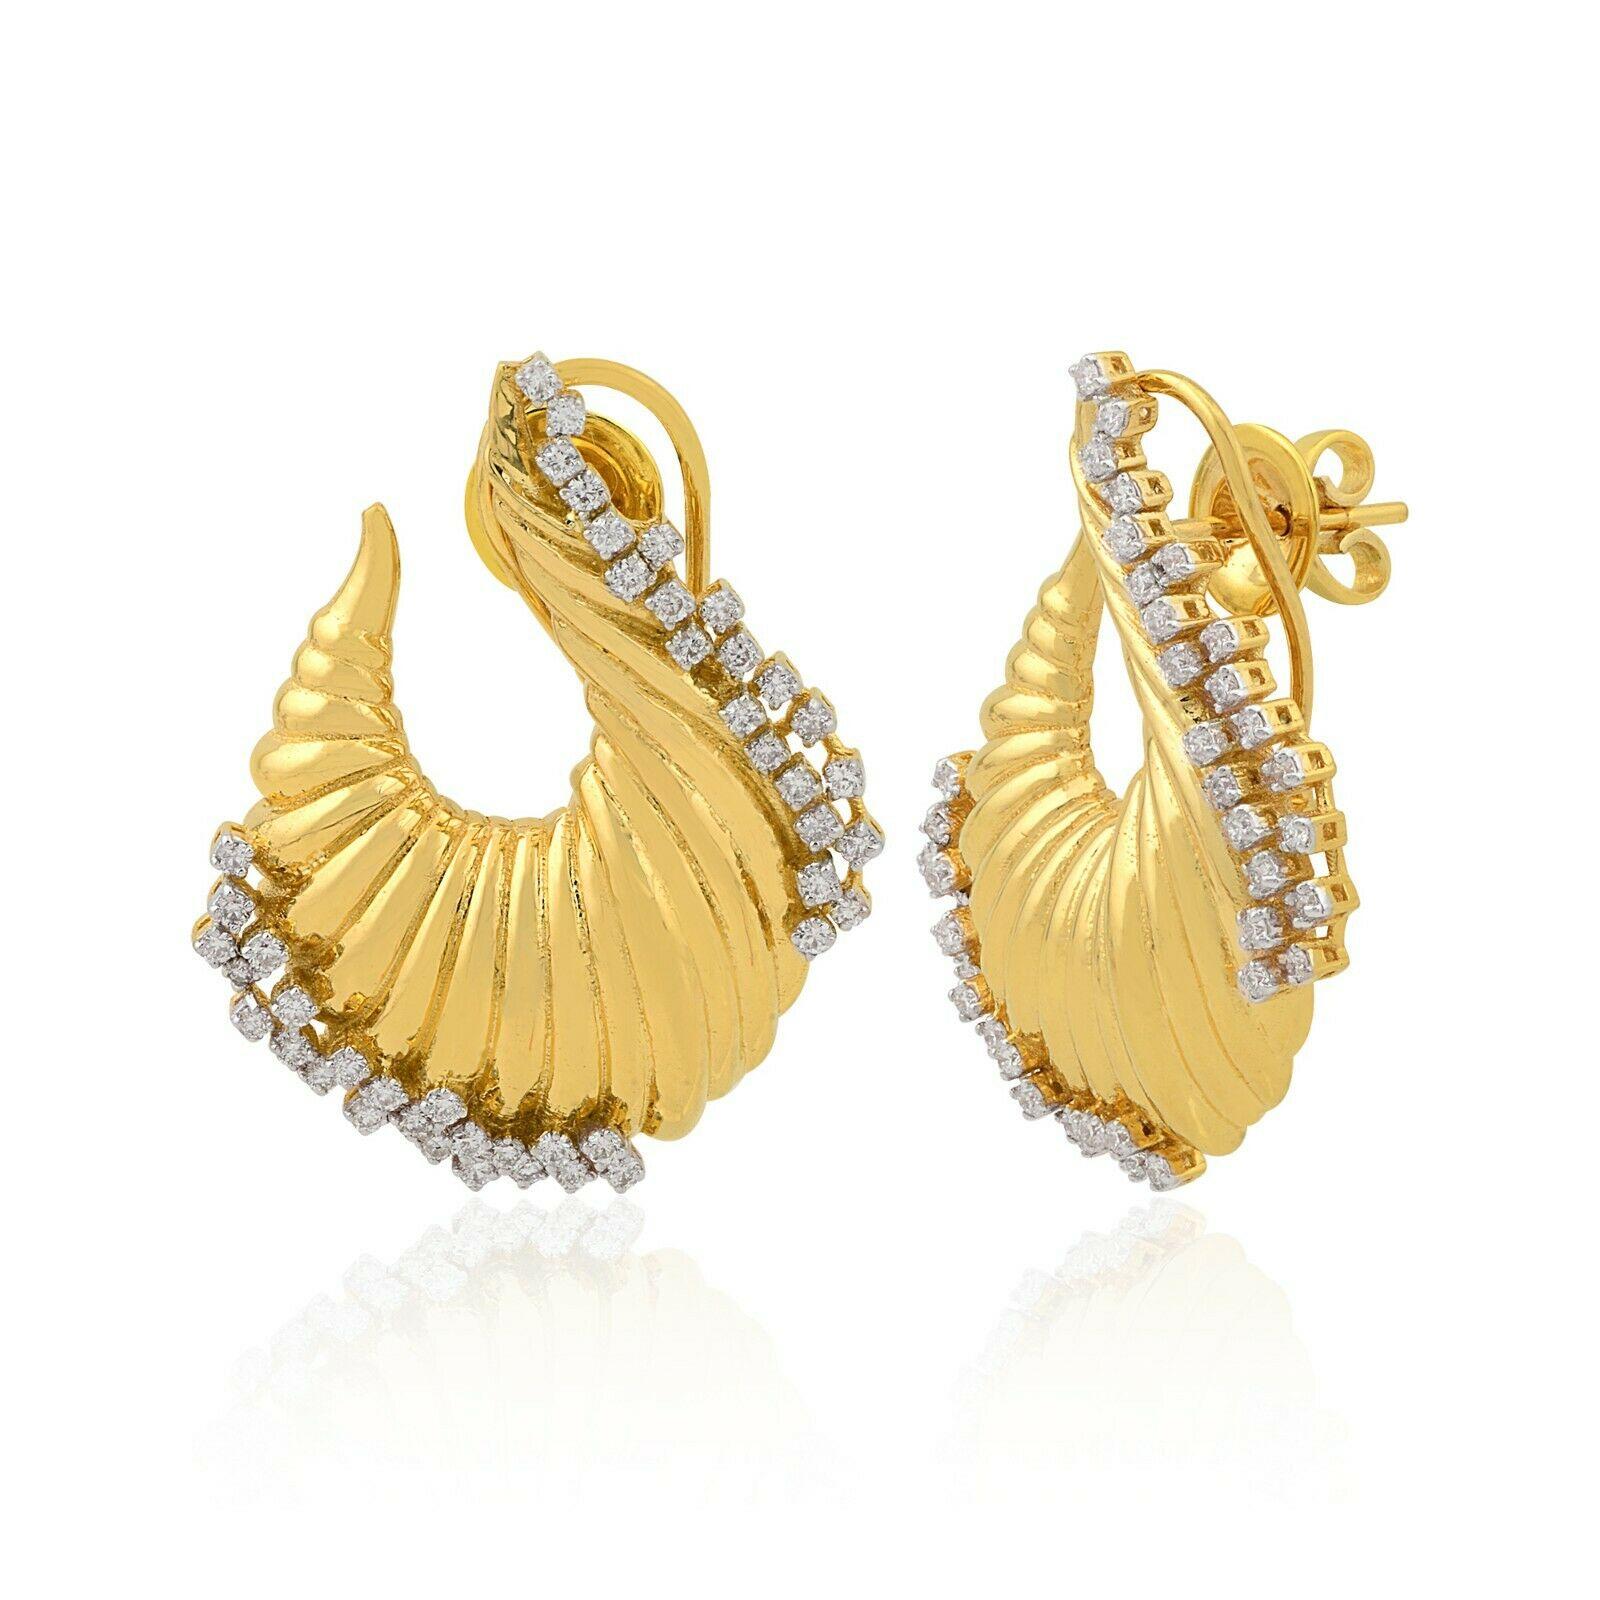 Cast in 14 karat gold, these earrings are hand set with .85 carats of glimmering diamonds. Available in white, rose and yellow gold.

FOLLOW MEGHNA JEWELS storefront to view the latest collection & exclusive pieces. Meghna Jewels is proudly rated as